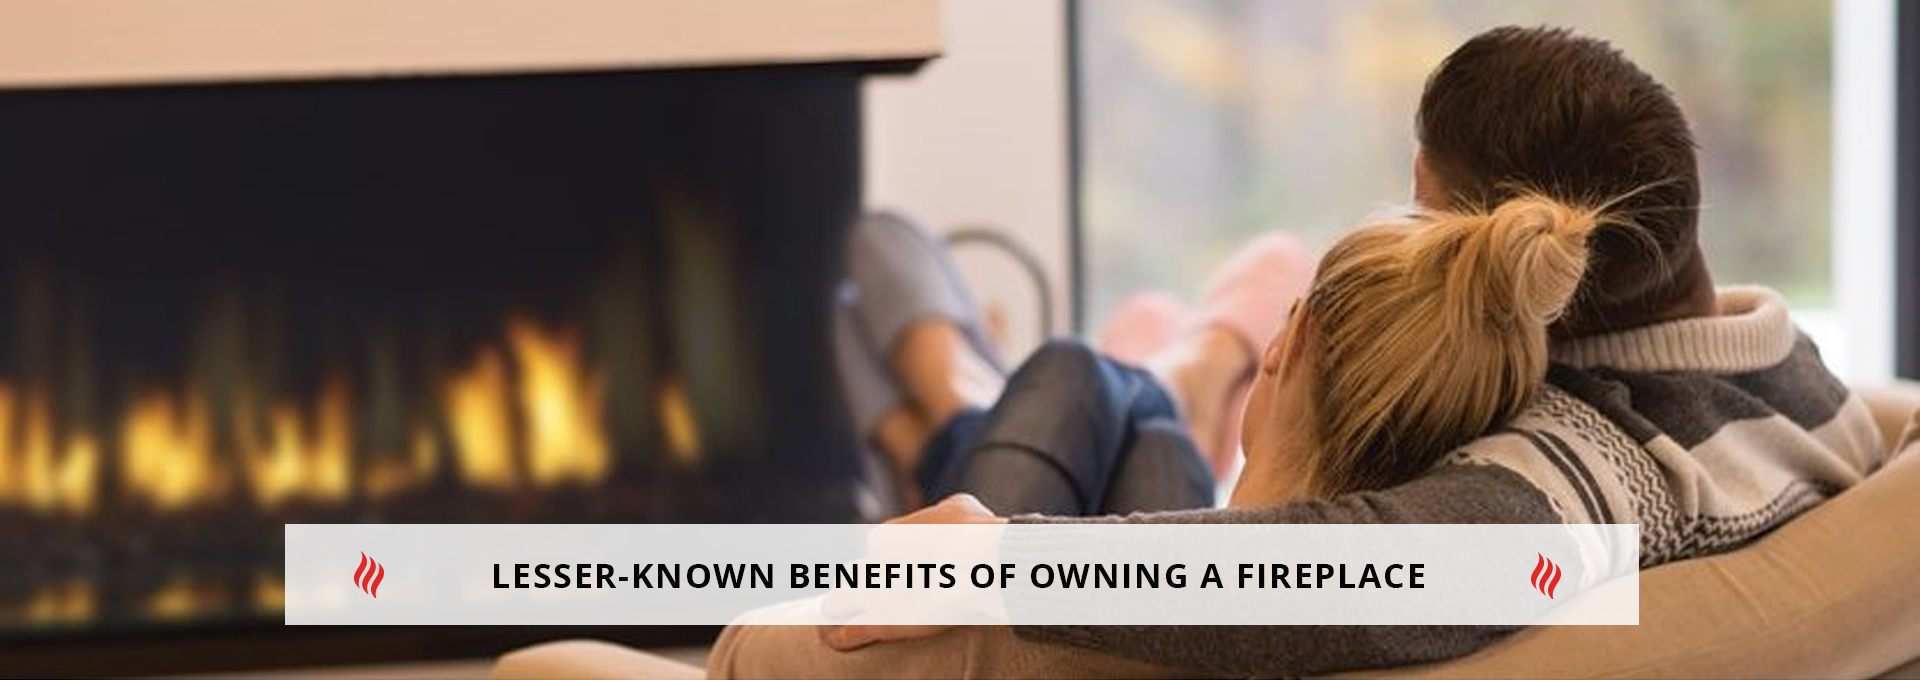 Lesser-Known Benefits of a Fireplace 